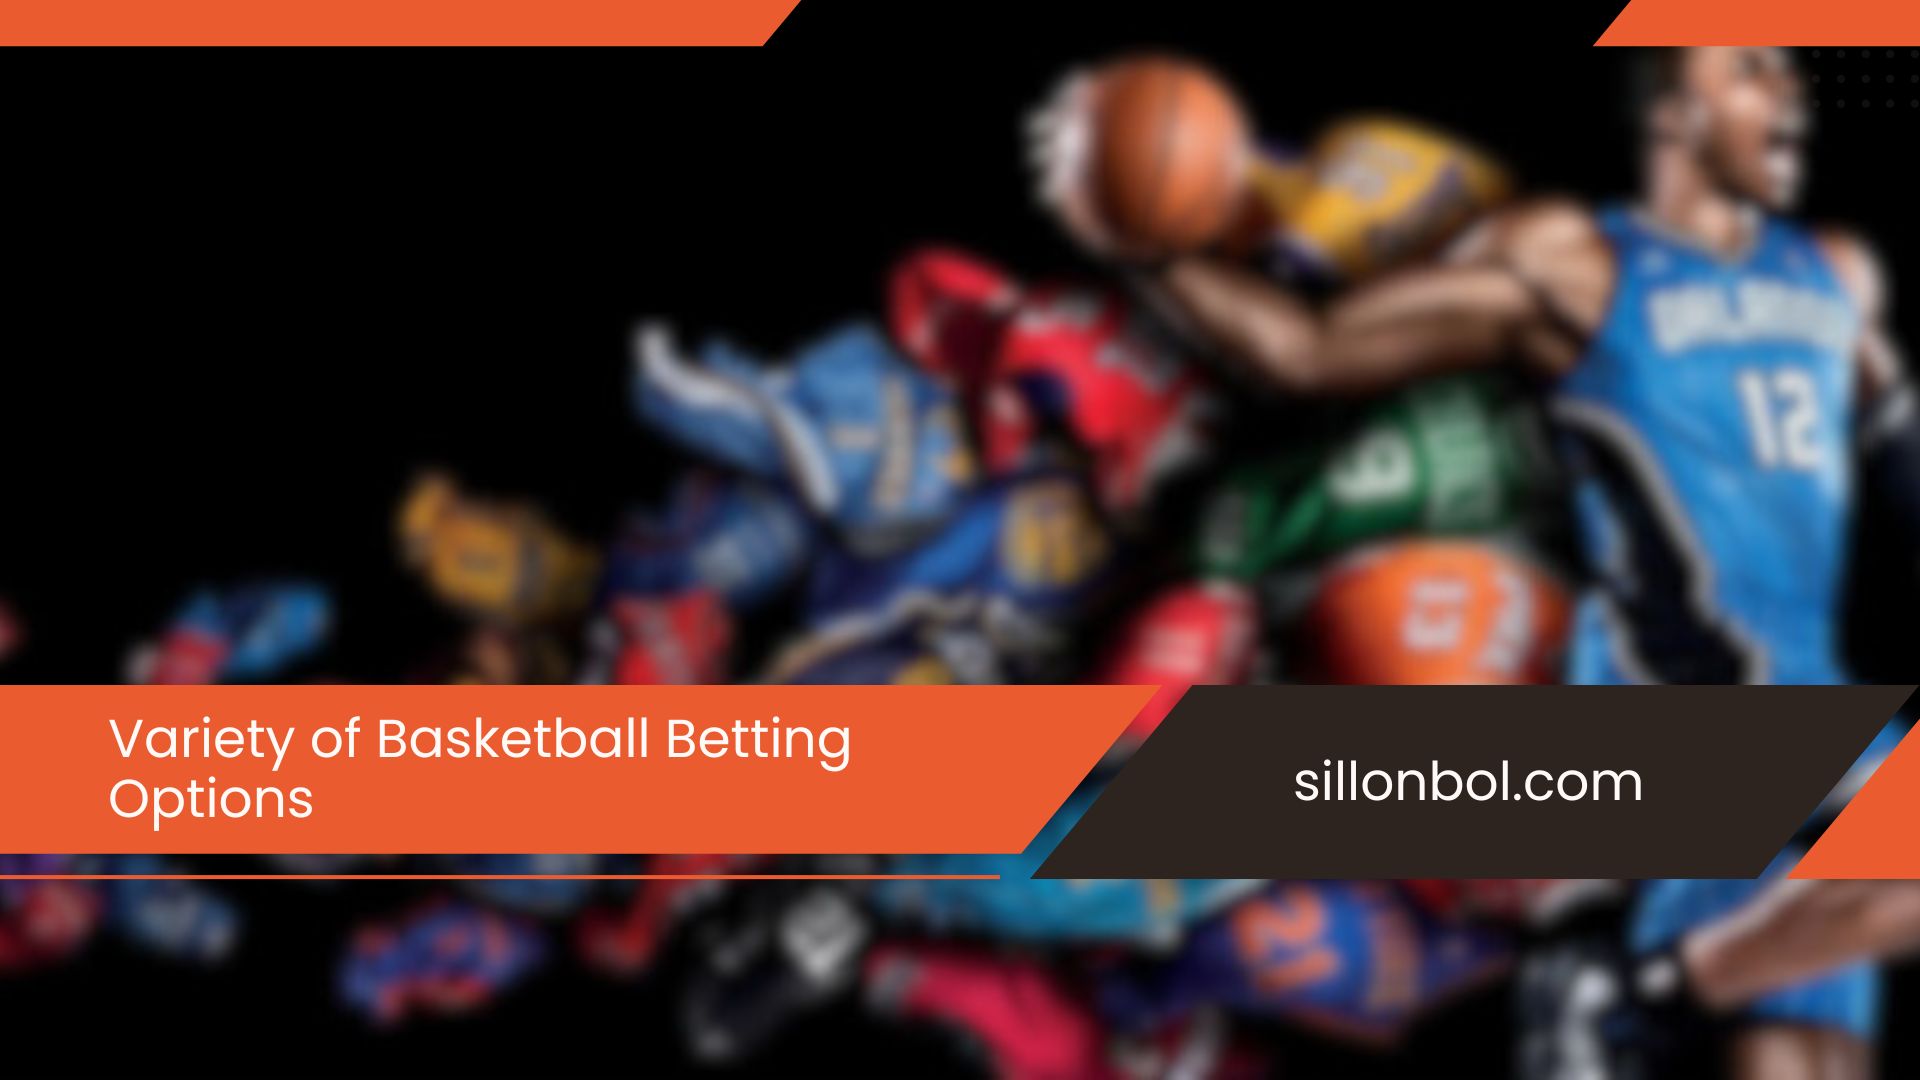 Variety of Basketball Betting Options